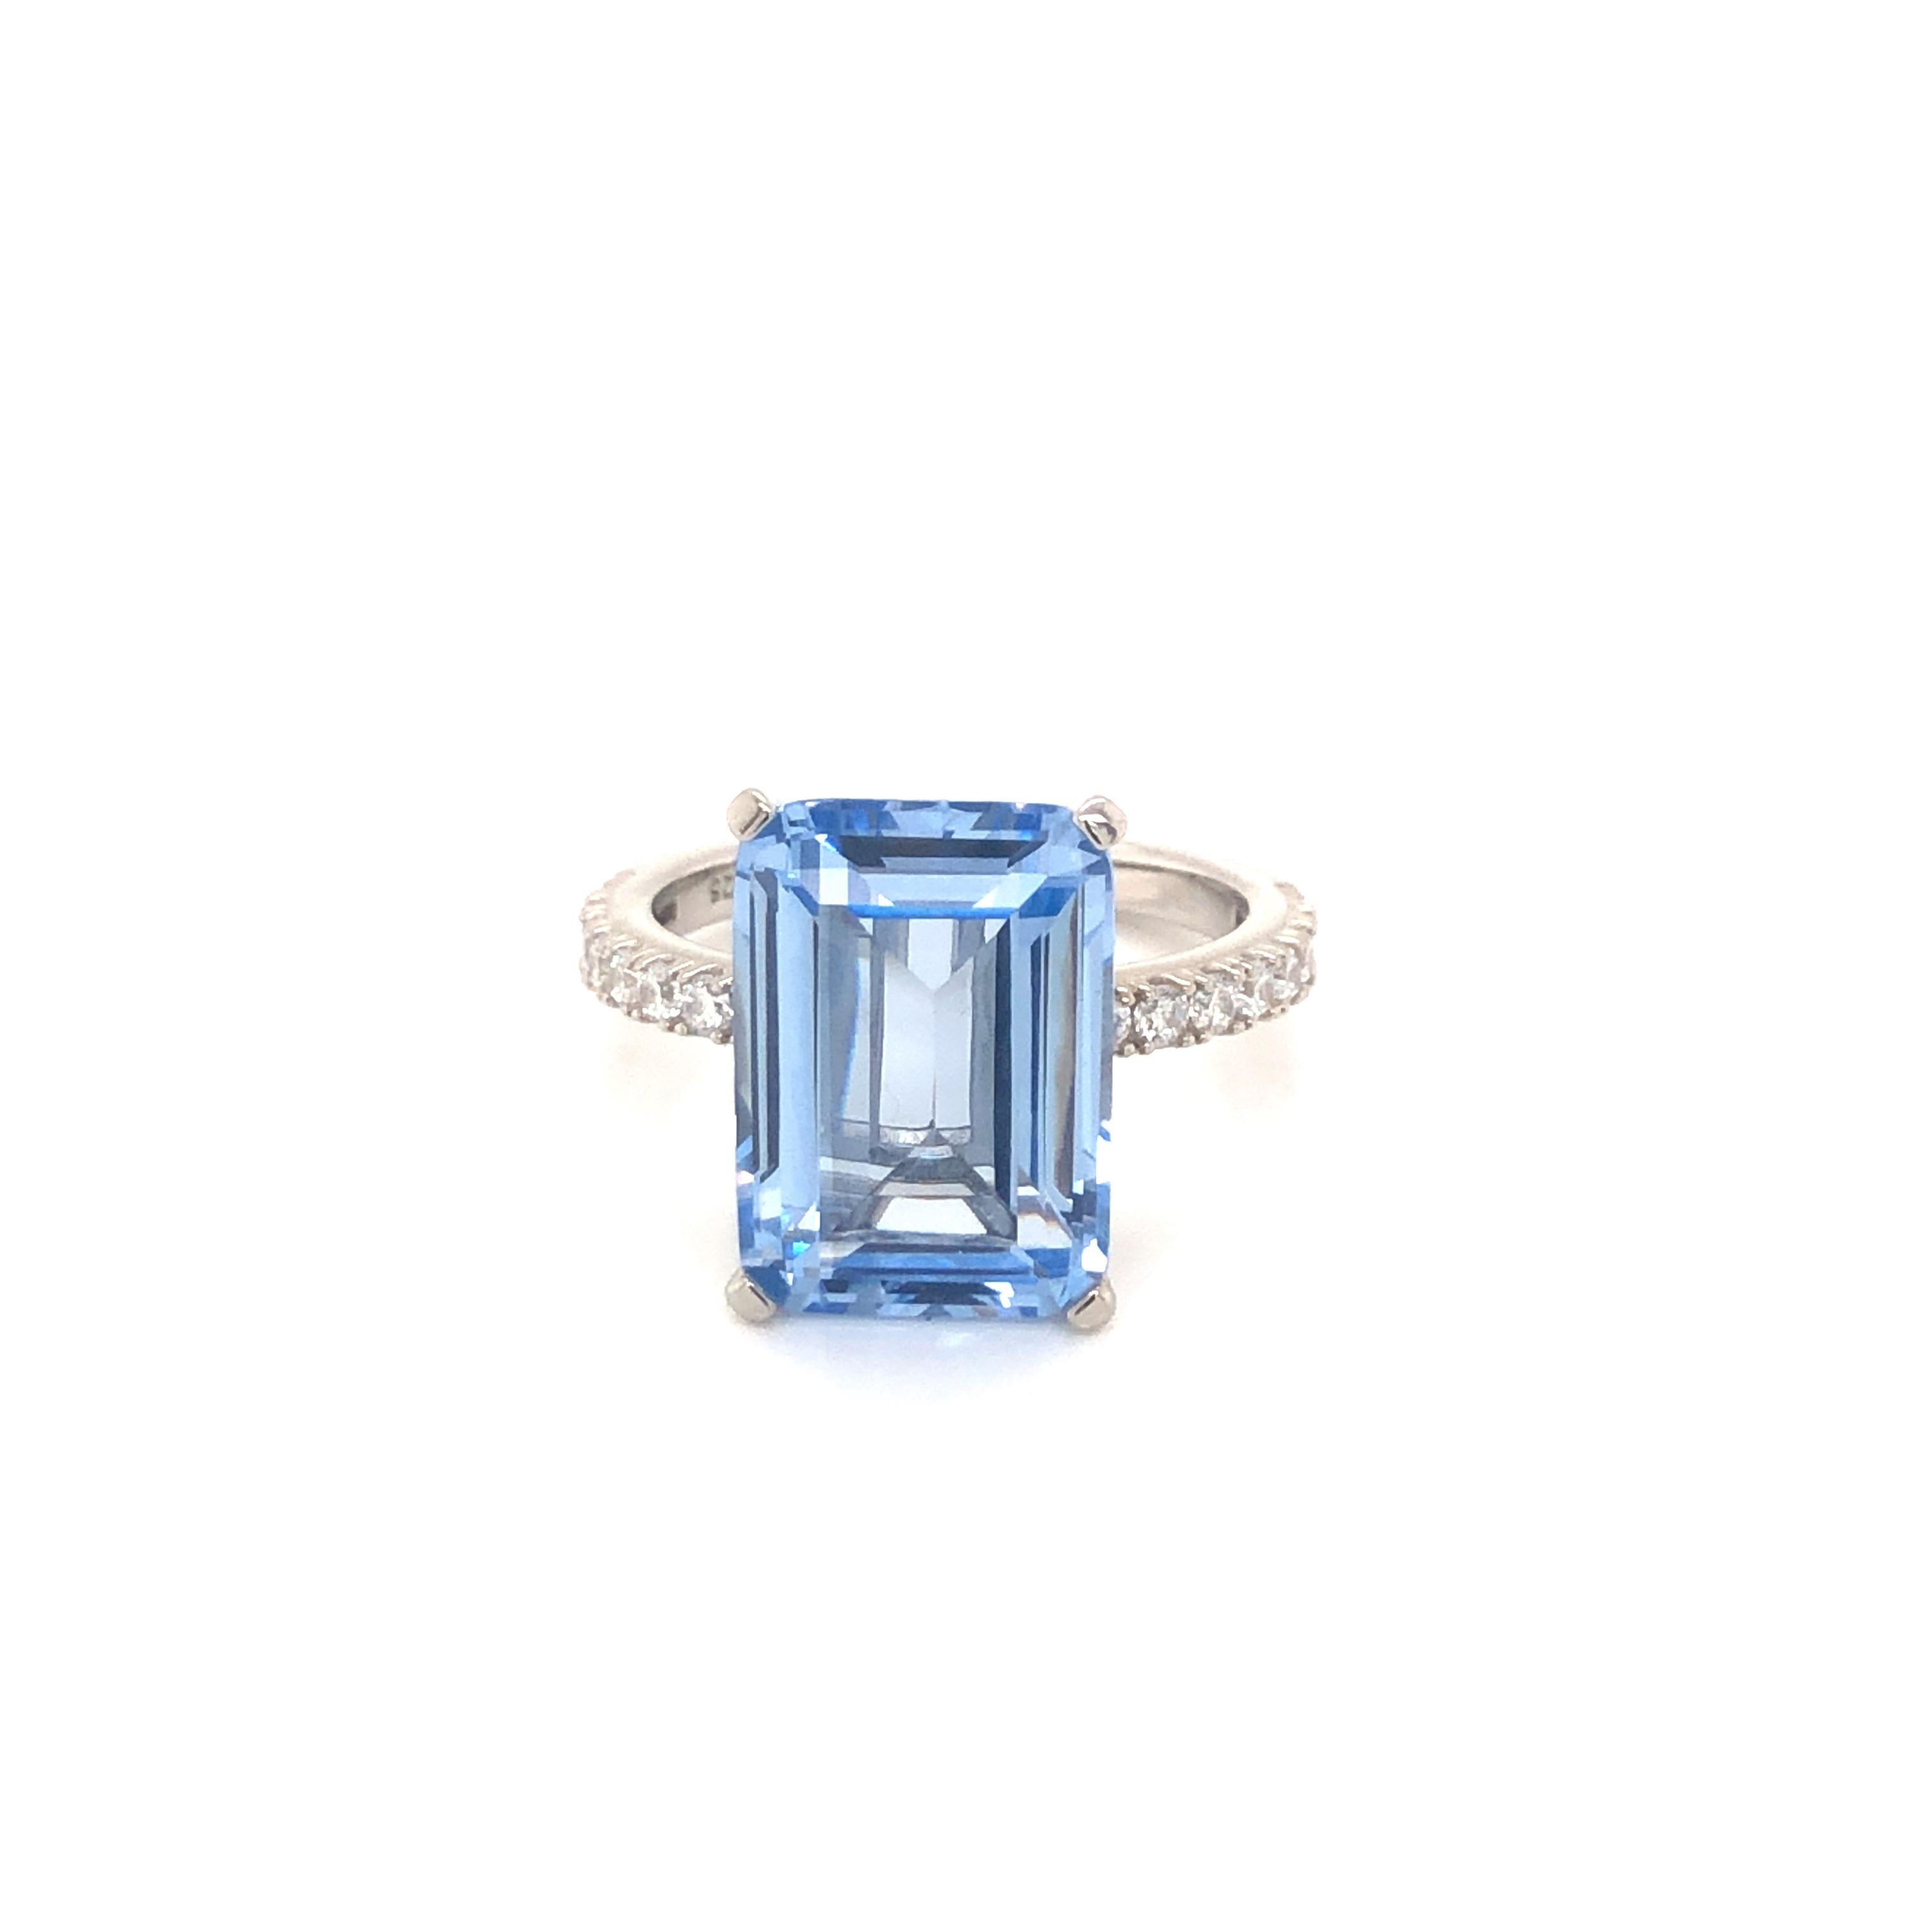 Striking ocean blue tones radiate from this stunning statement piece. 

Featuring a large 8.00ct light blue spinel emerald cut, with 0.32ct of round brilliant cuts on the shoulders, set in platinum on 925 sterling silver.

Whether you're looking for